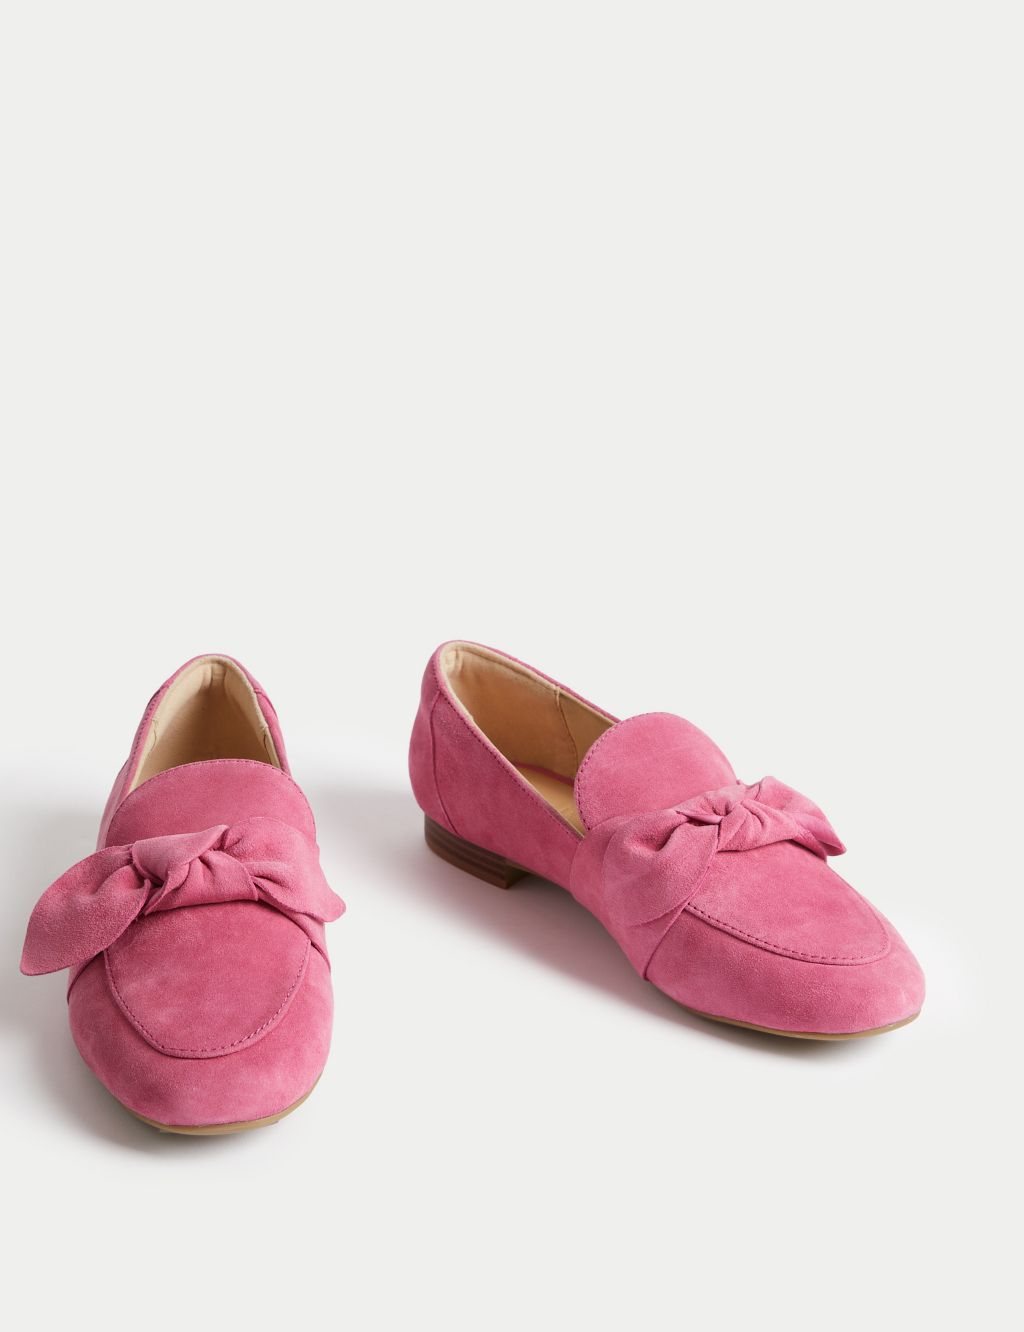 Wide Fit Suede Bow Flat Loafers image 1